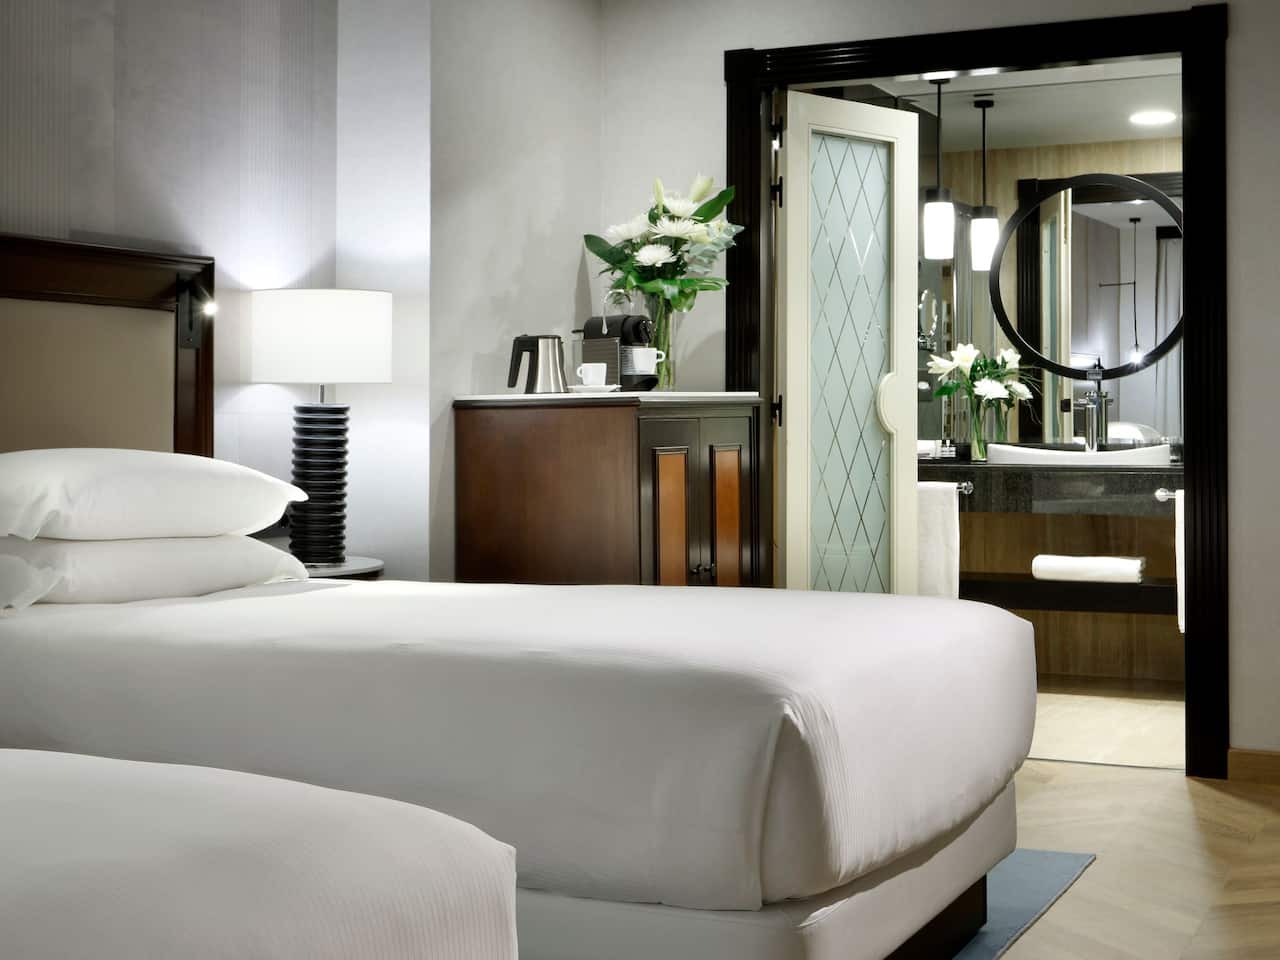 Details of the Regency Suite Twin room with two single beds at our Hyatt Regency Hesperia Madrid hotel.